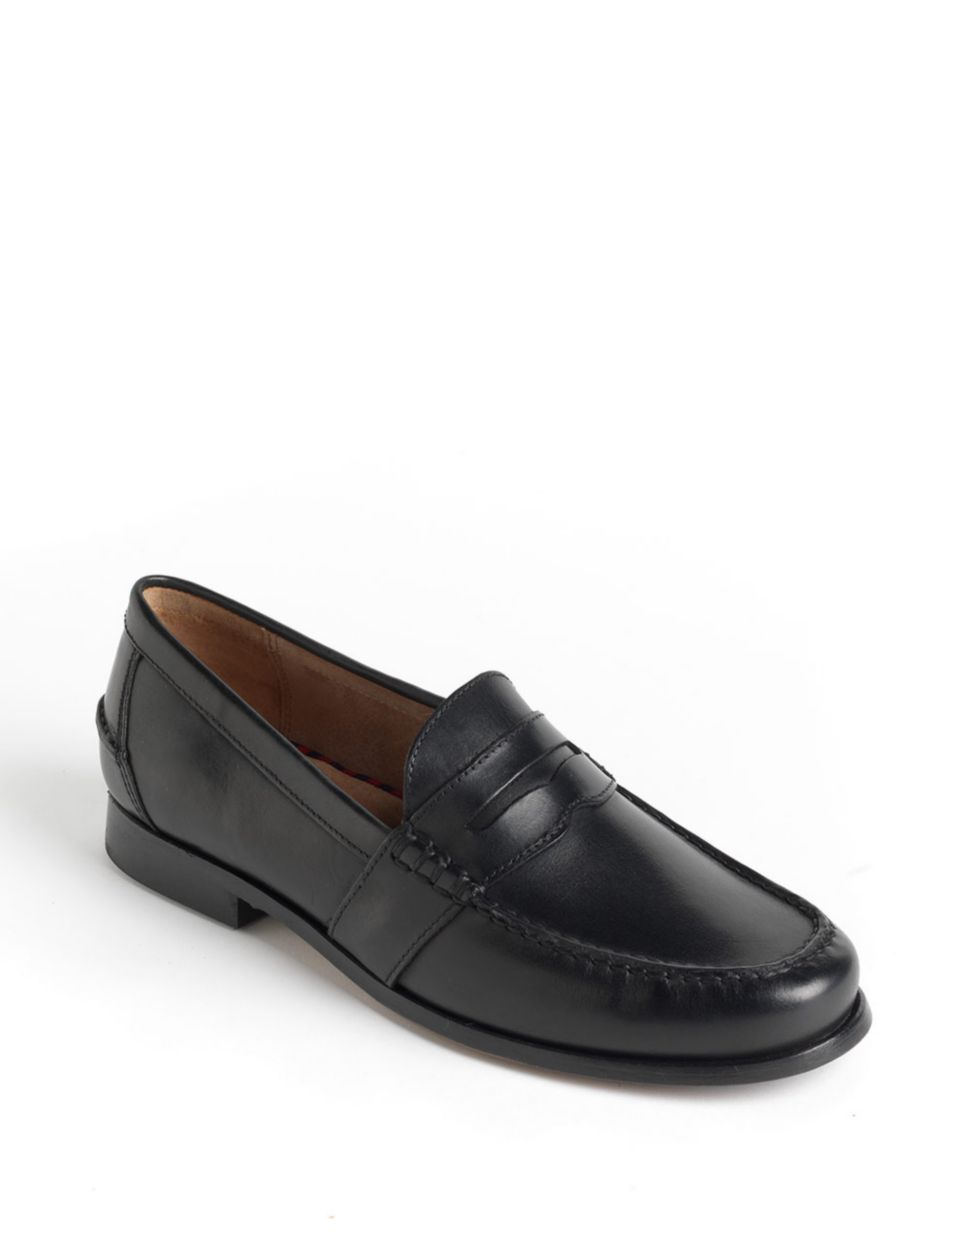 Polo Ralph Lauren Arscott Leather Penny Loafers in Black for Men - Lyst